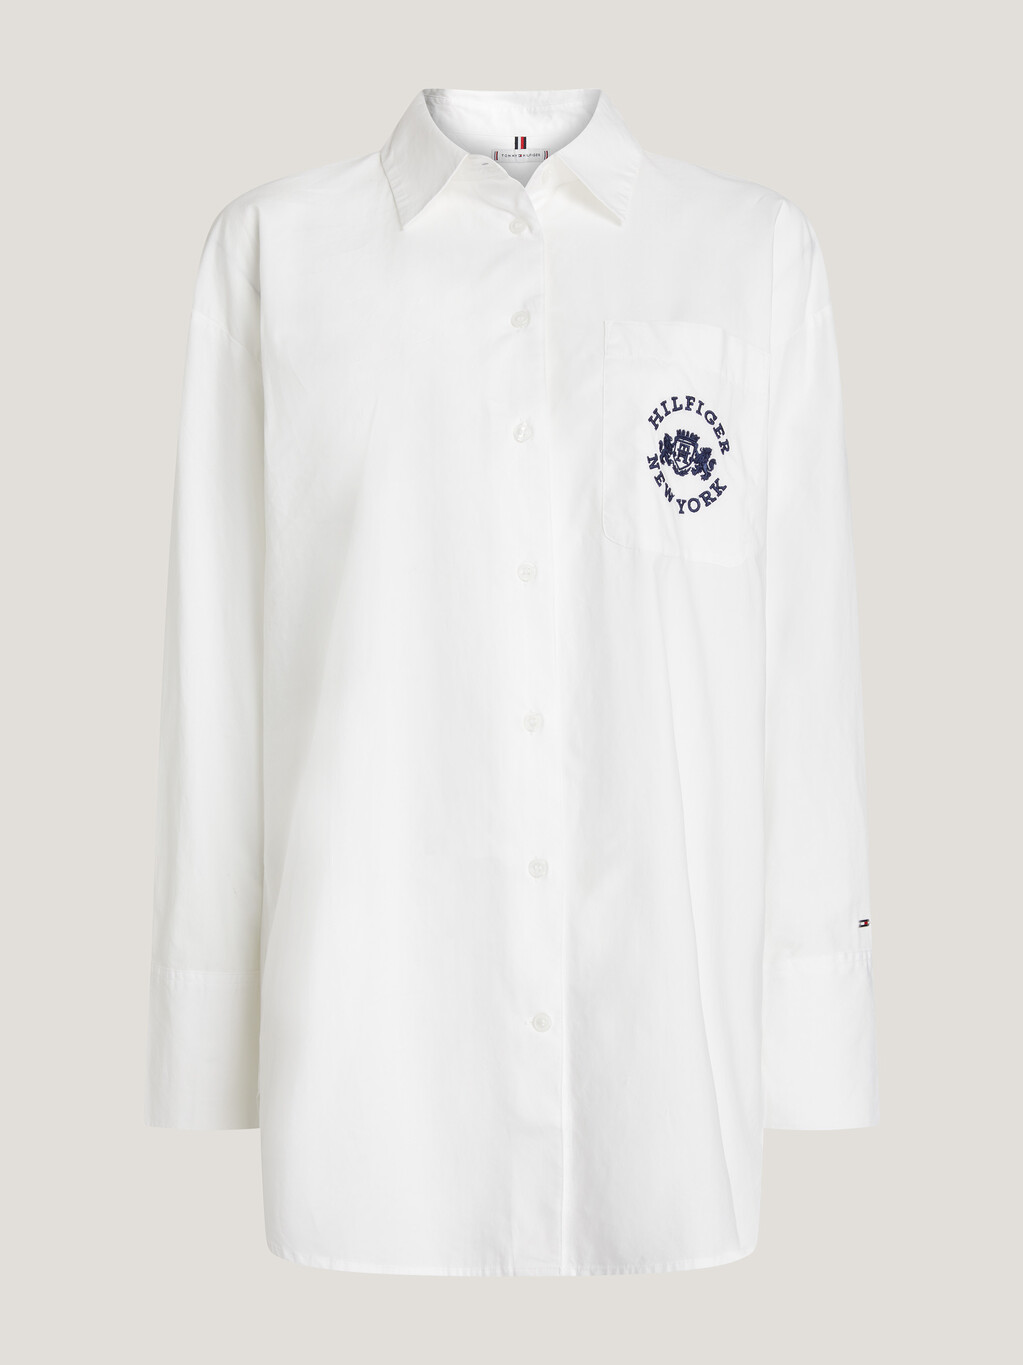 Crest Embroidery Shirt, Th Optic White, hi-res